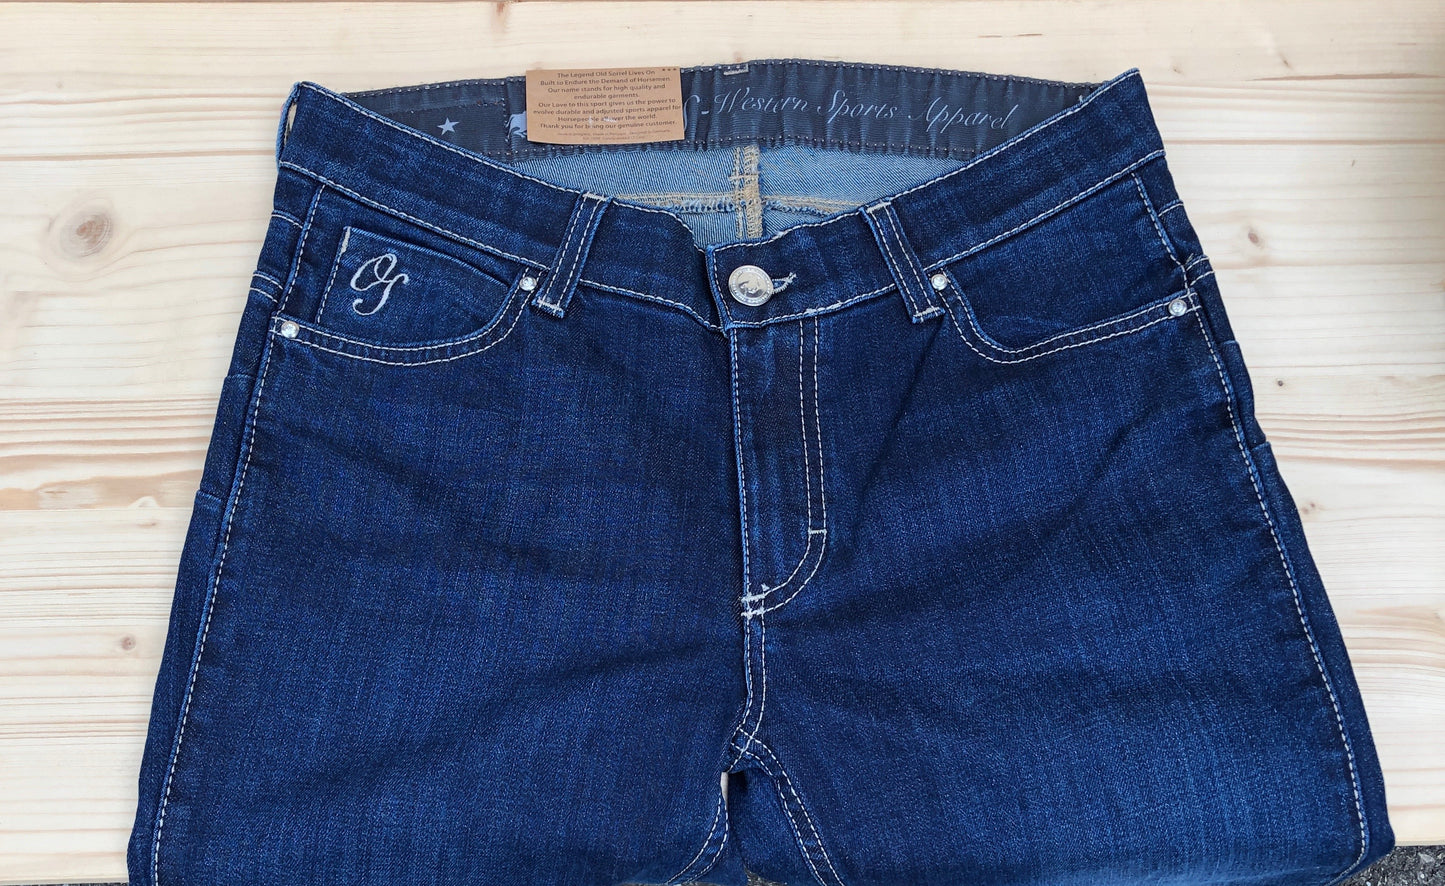 Lady's Jeans Old Sorrel "Annie"